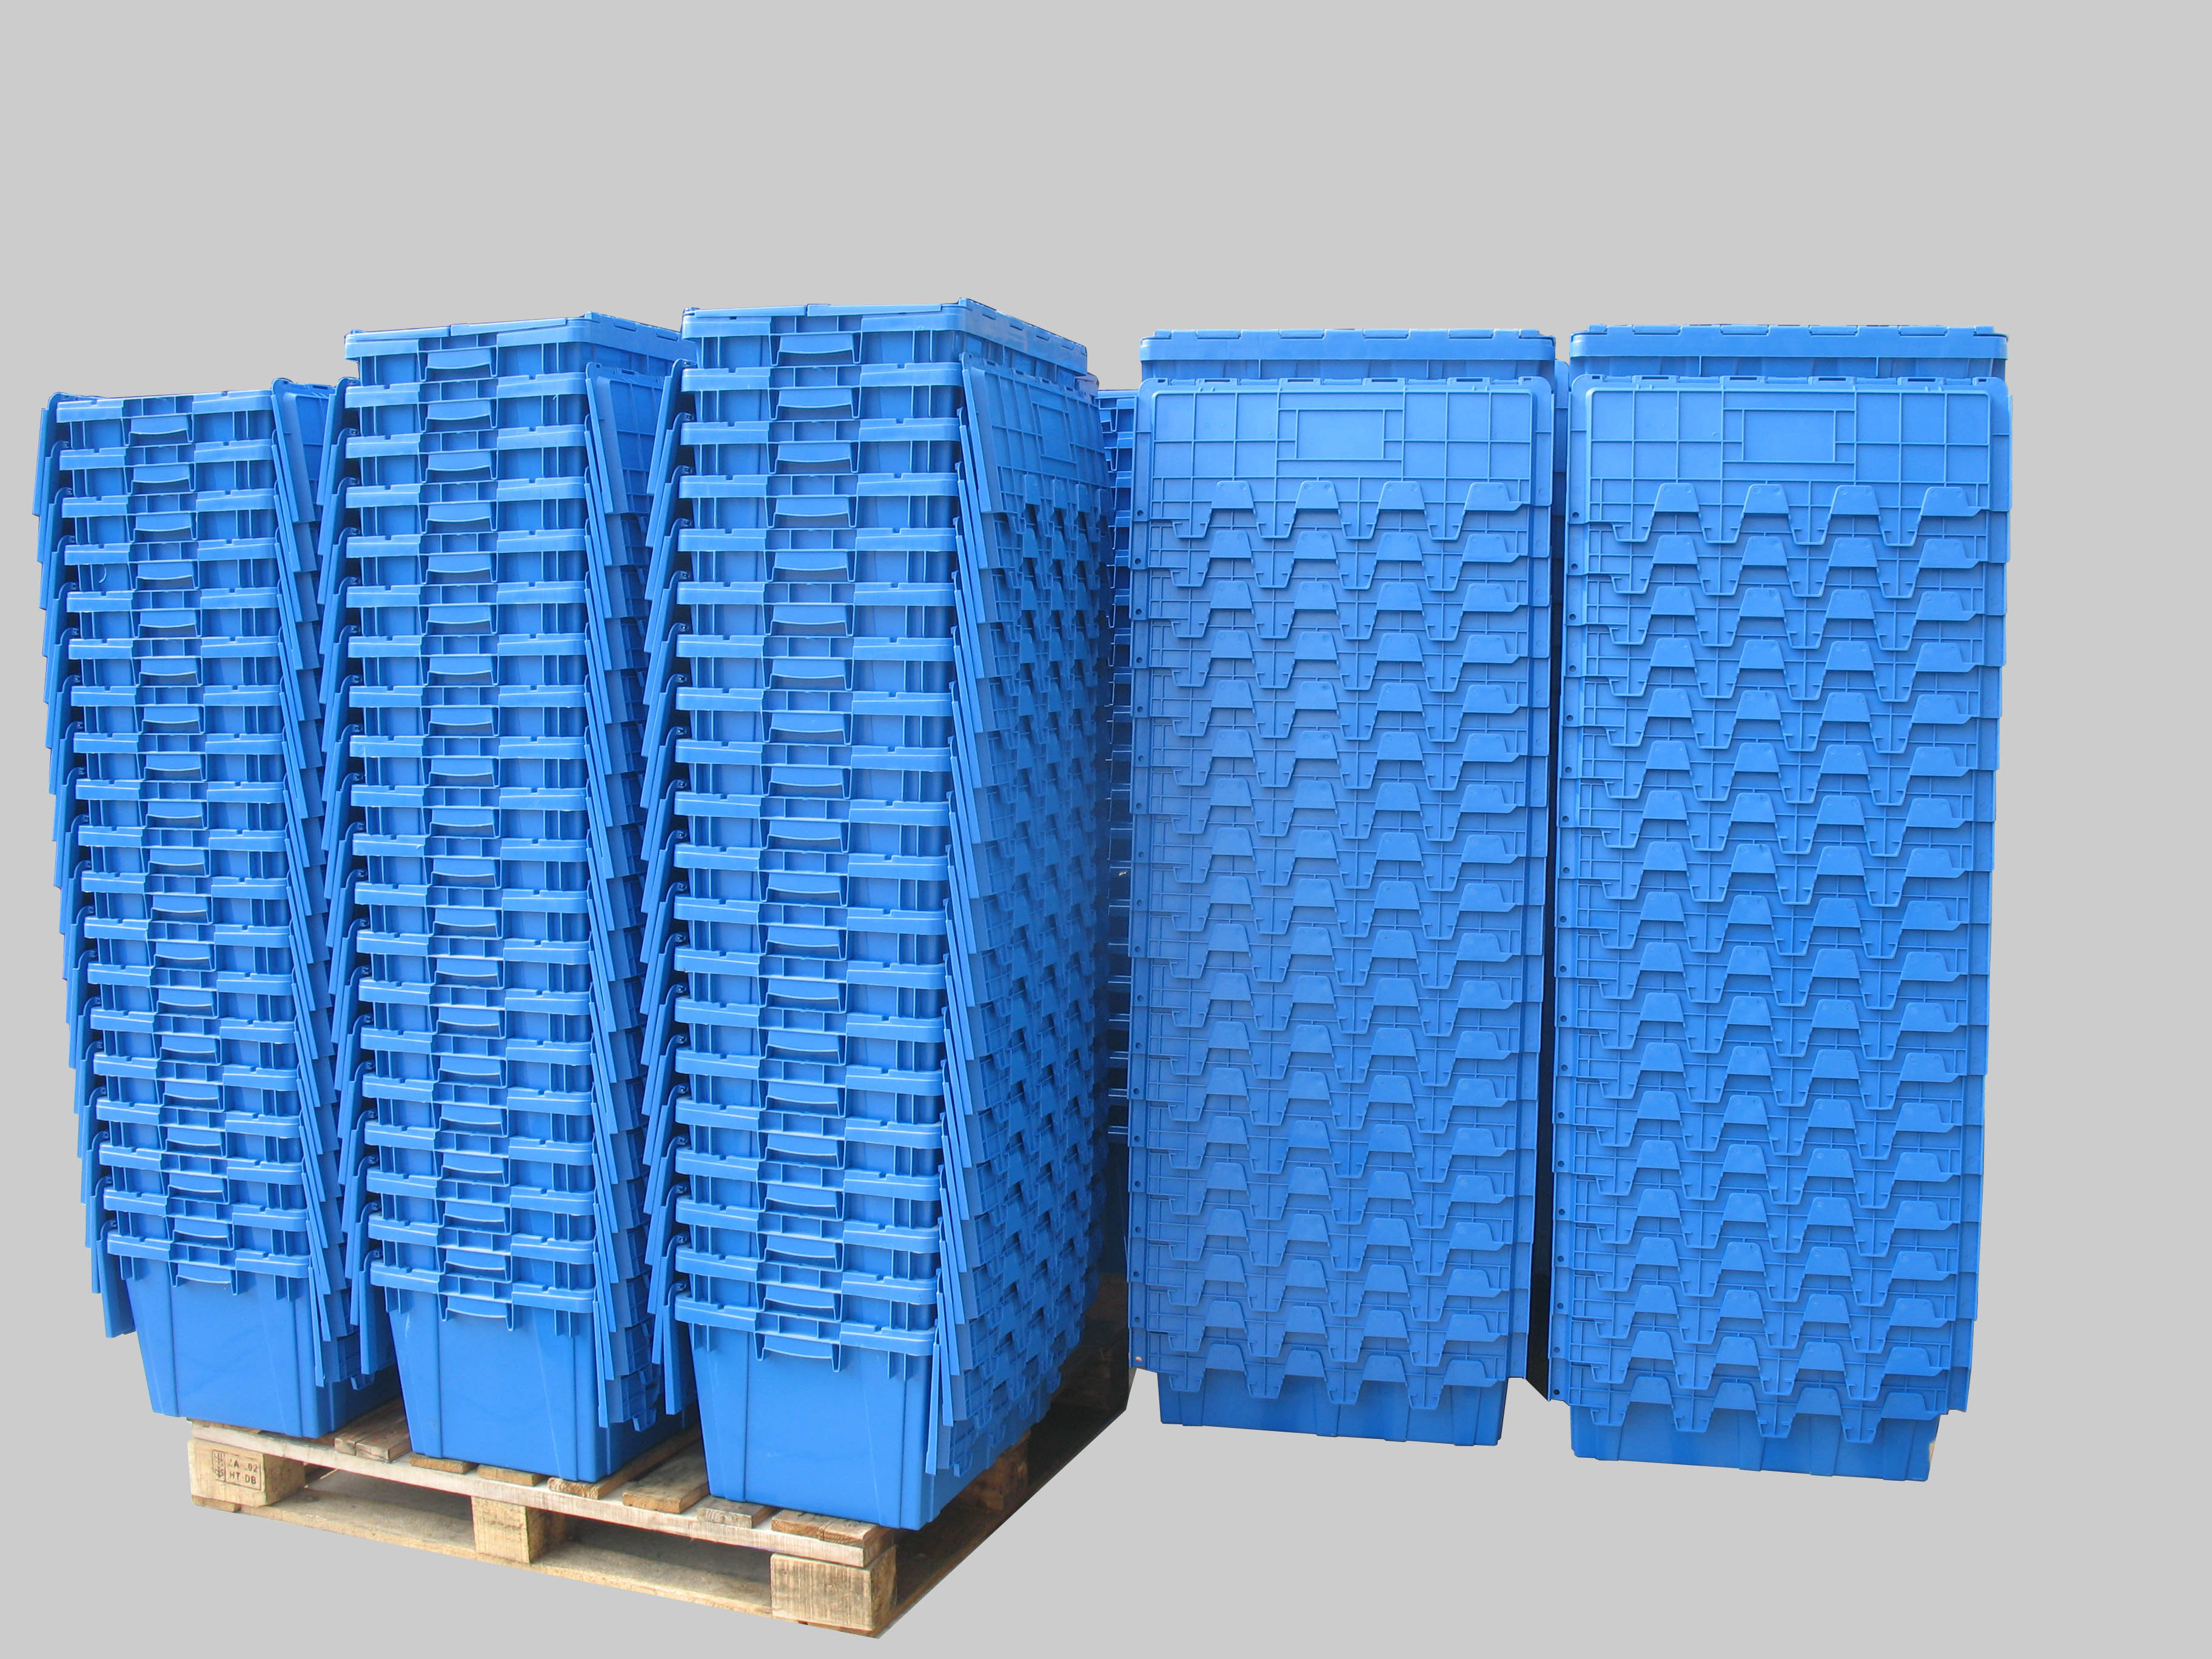 Wholesale Plastic Storage Boxes with Lids Plastic Stack And Nest Containers